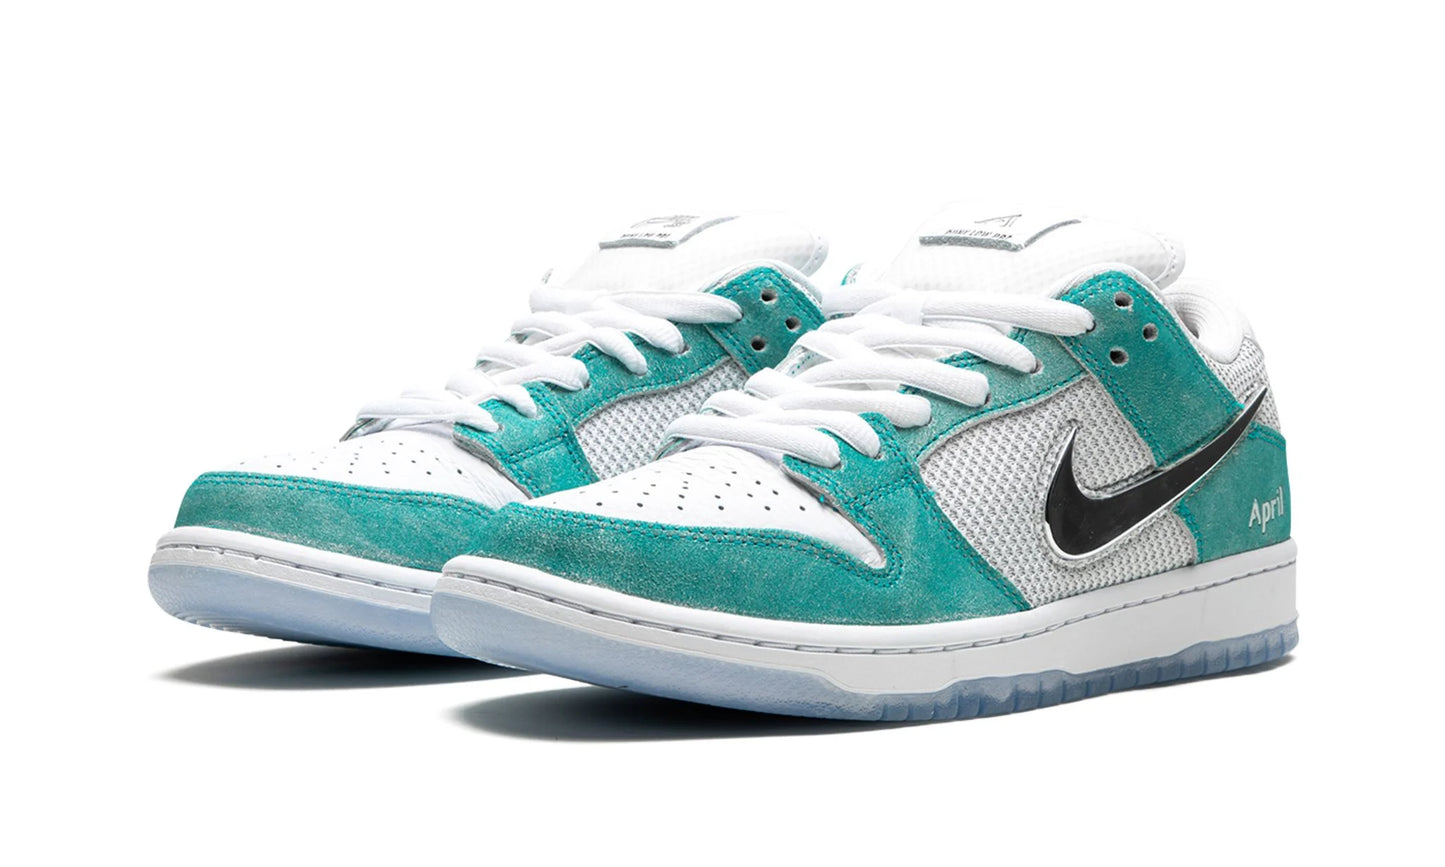 Nike SB Dunk Low April Skateboards Front View